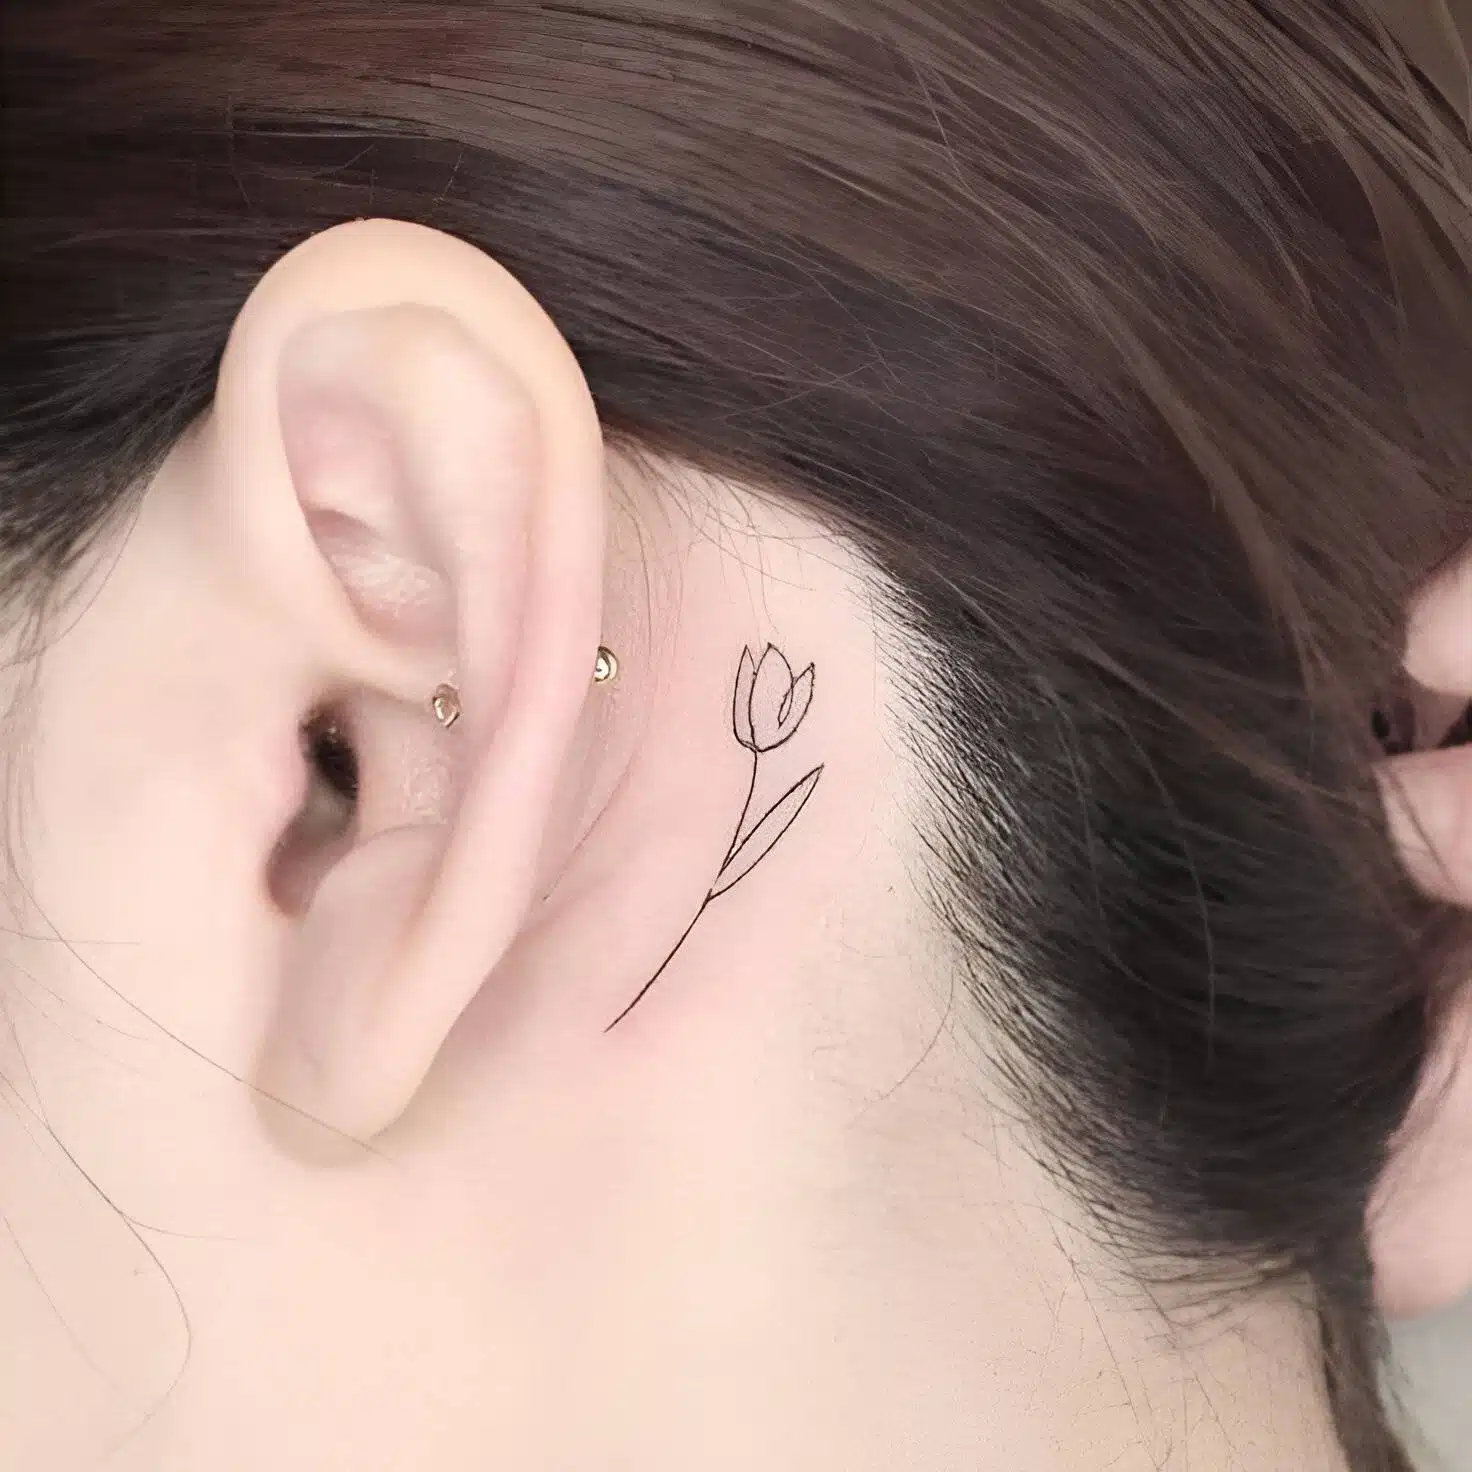 25 Low-key Stunning Behind The Ear Tattoos To Get ASAP - 189